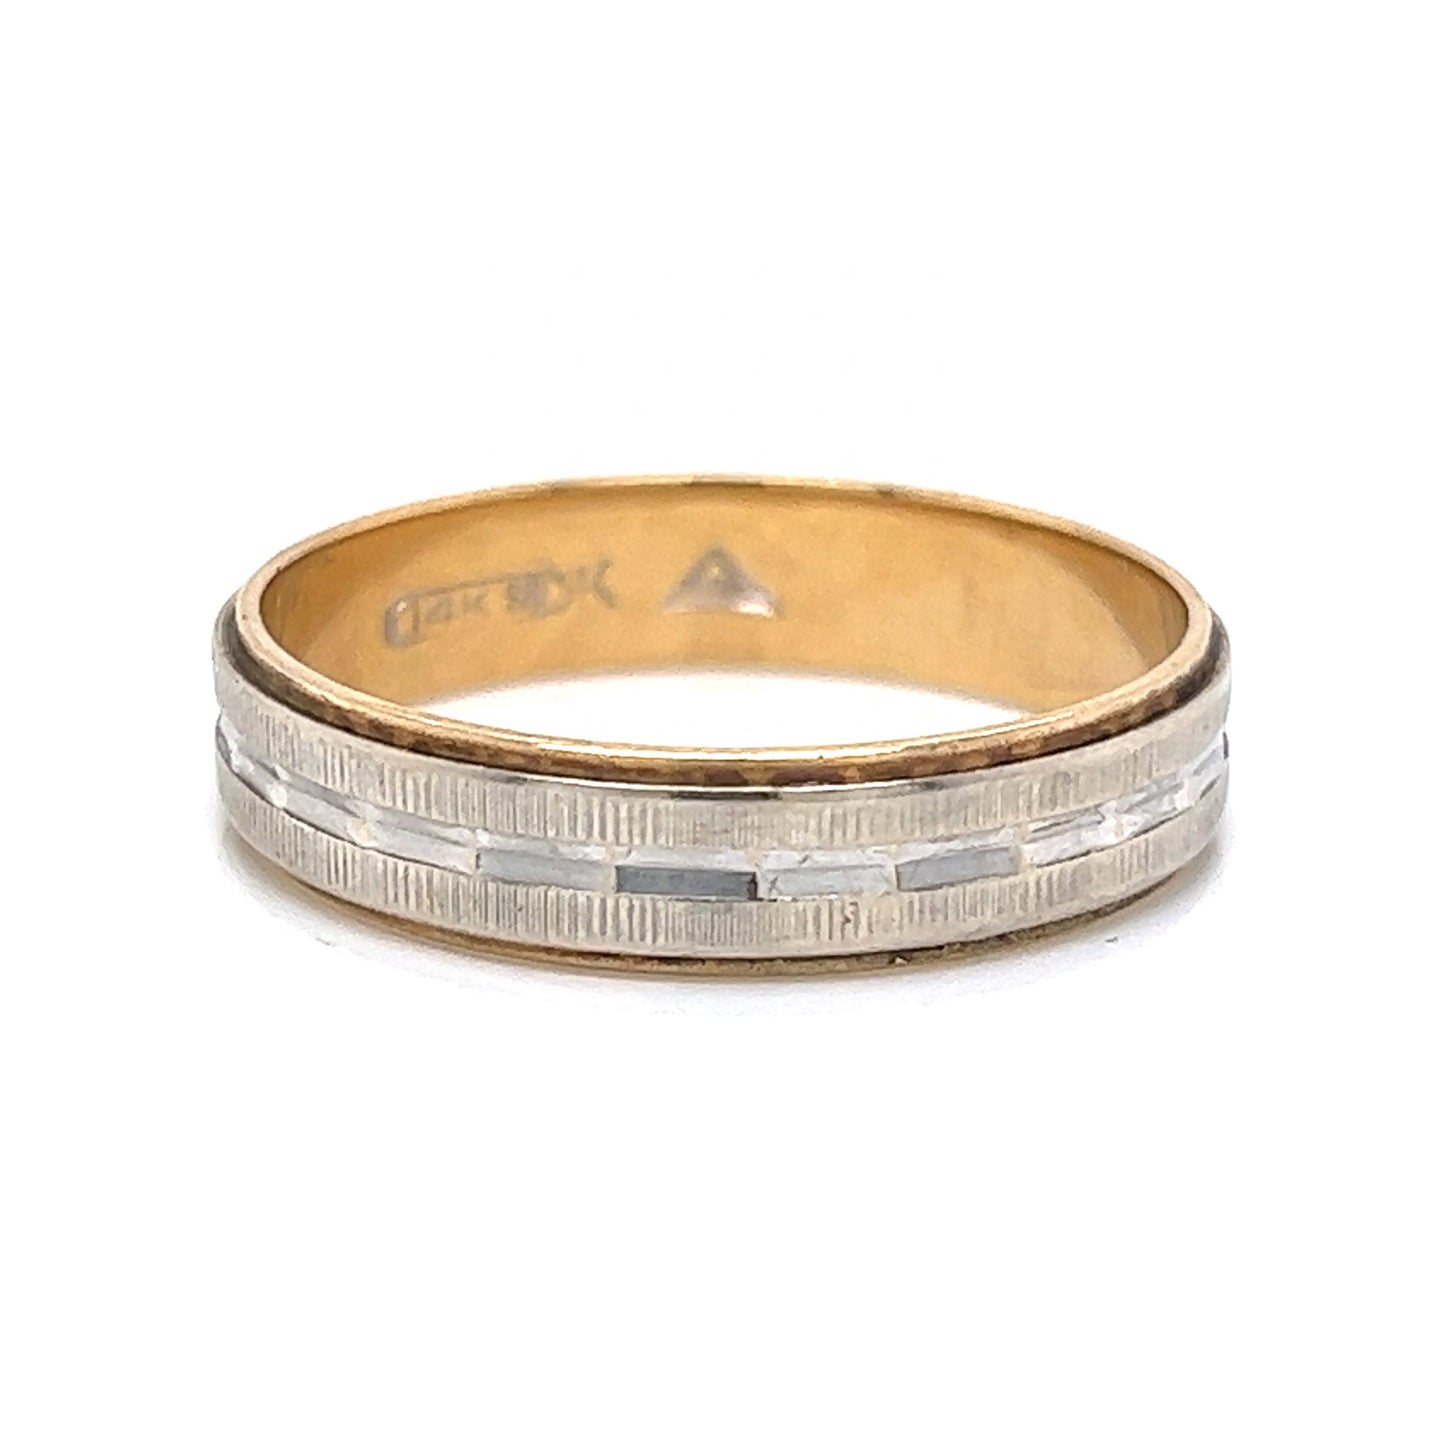 Vintage Men's Two-Tone Textured Wedding Band in 14k Gold